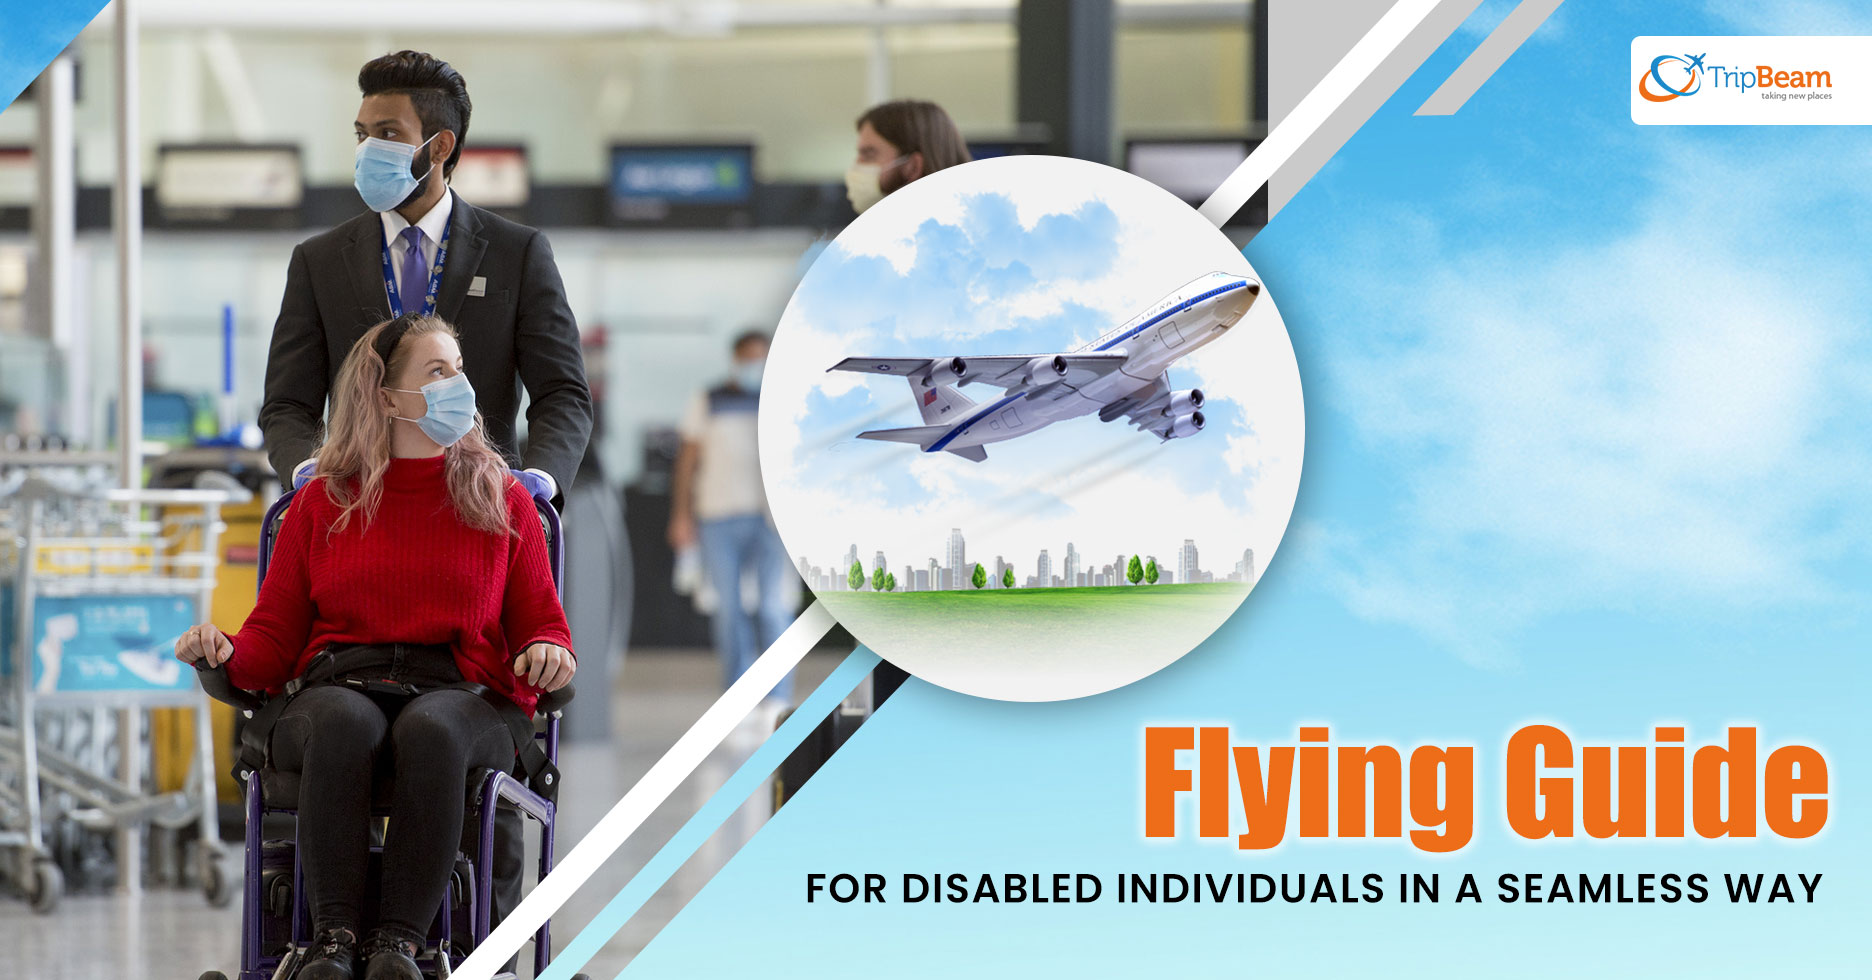 Flying Guide for Disabled Individuals in a Seamless Way